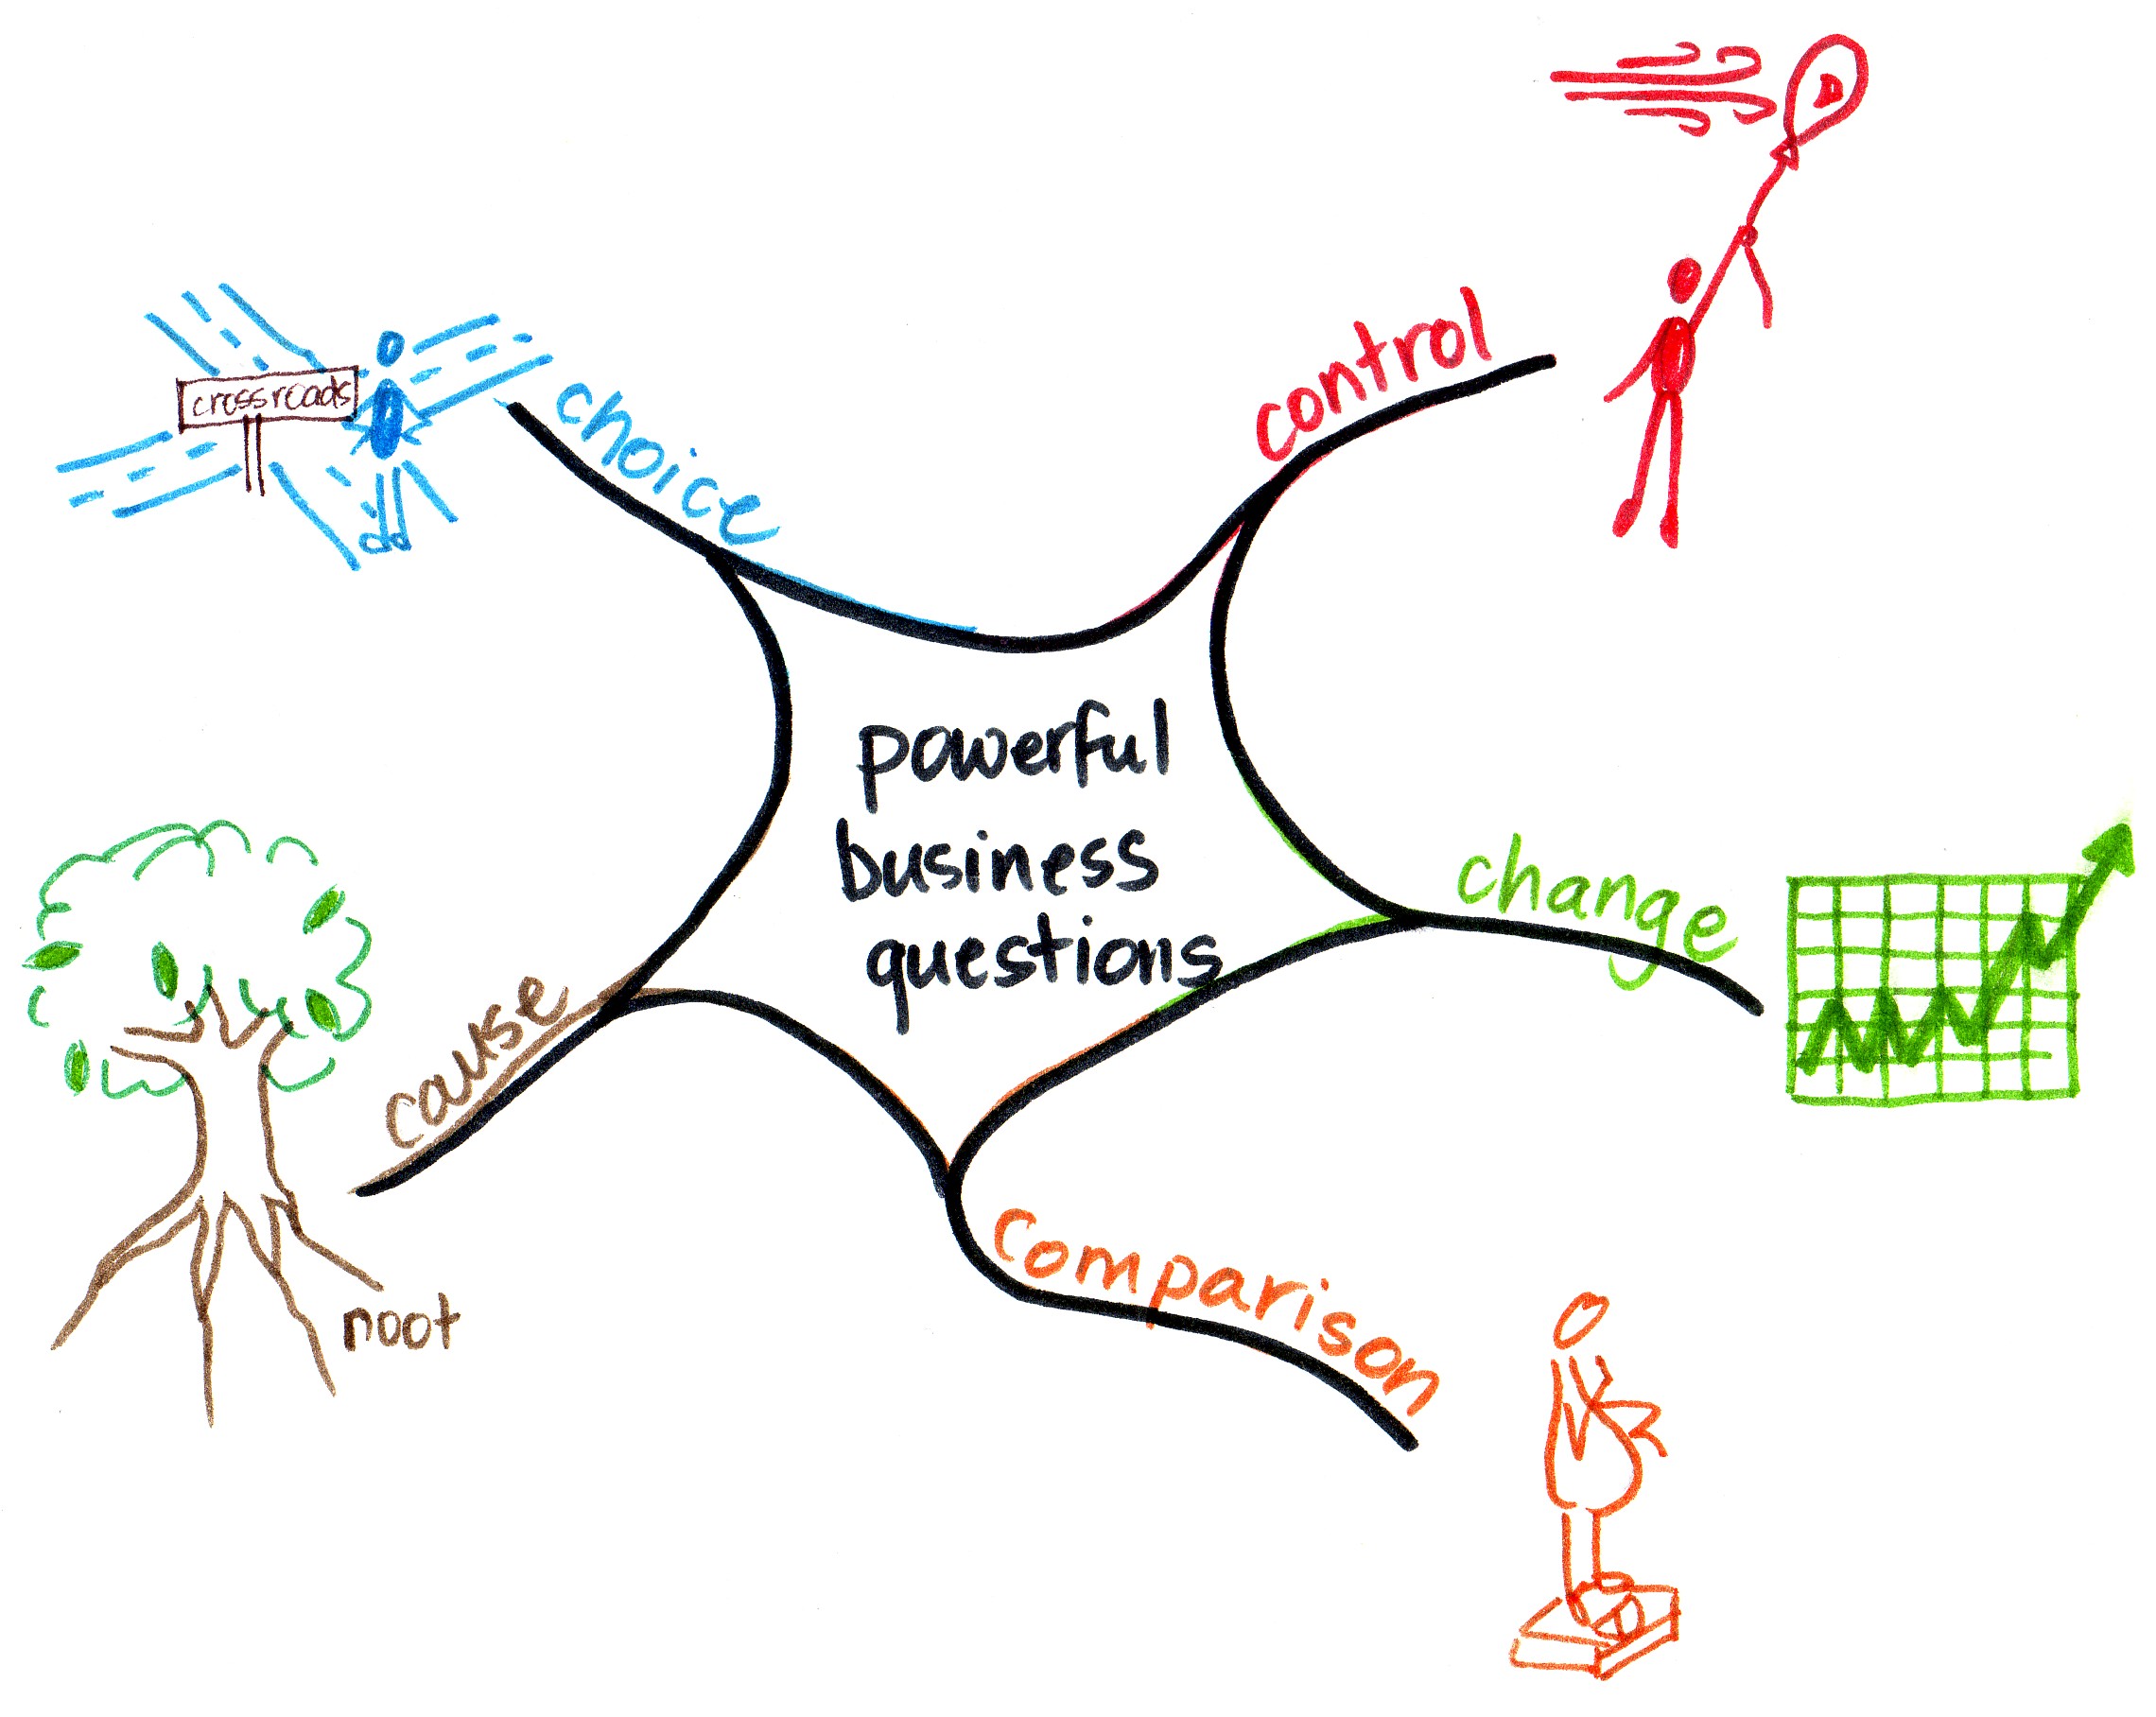 Stacey's artwork for the 5 powerful business questions that will guide analytics